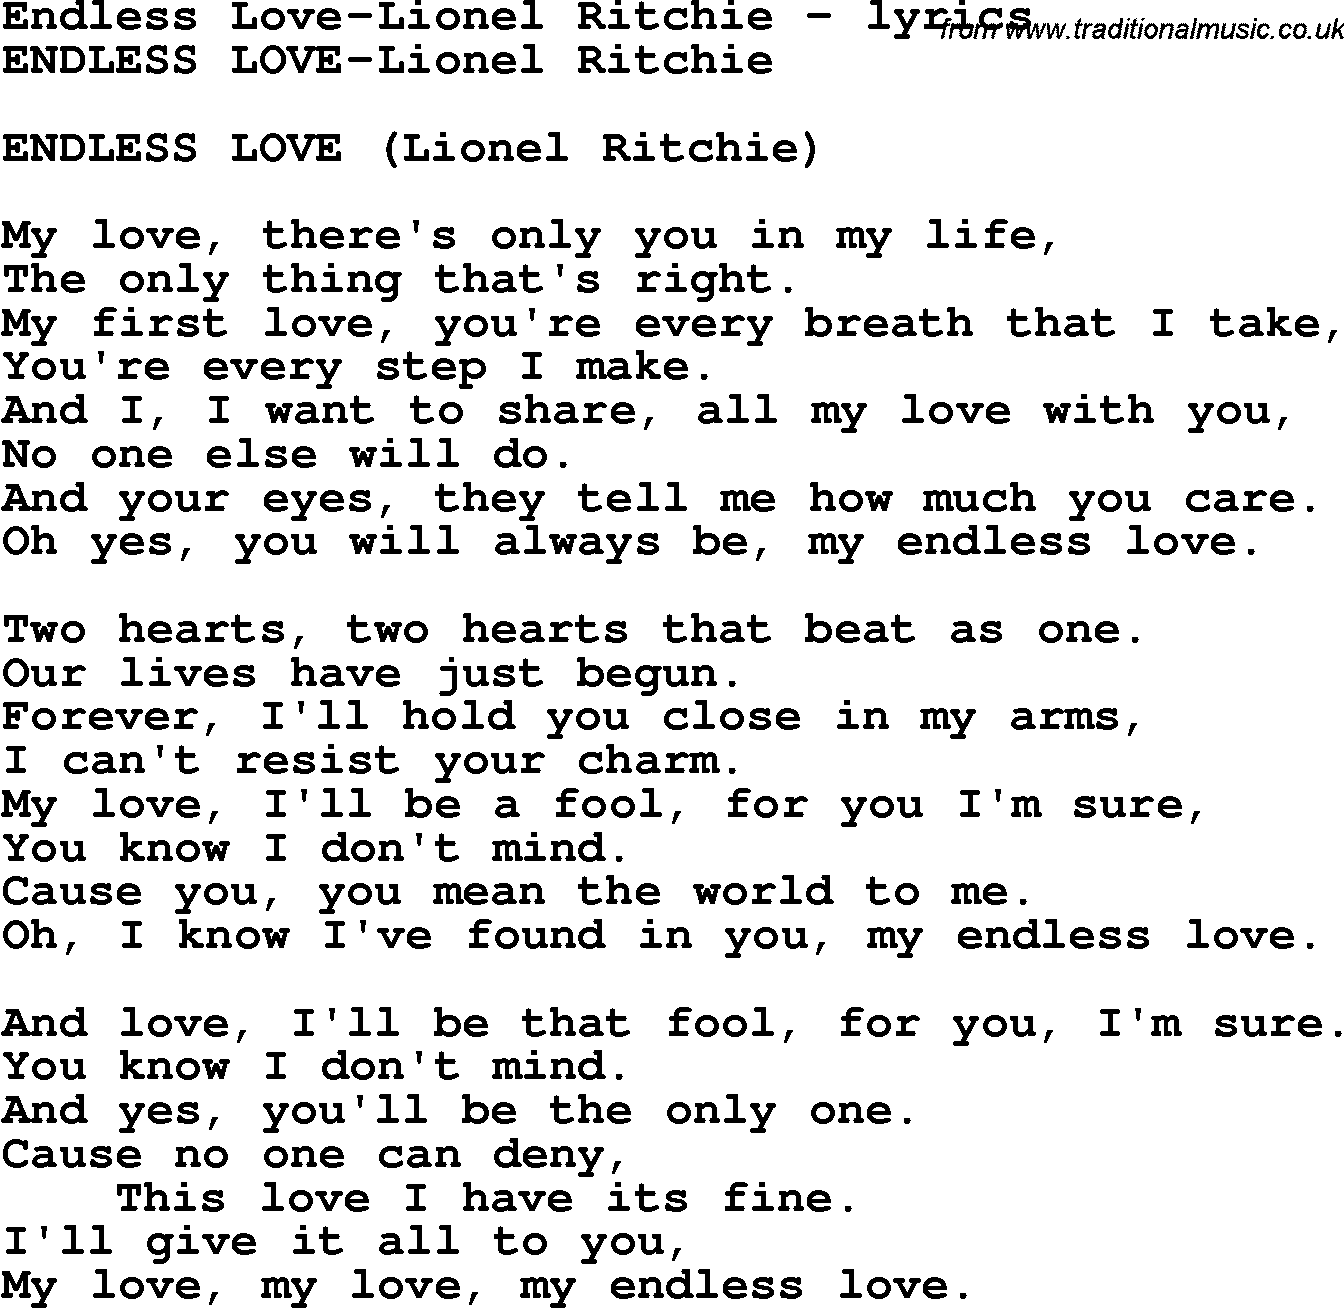 Endless love  Endless love song, Lyrics to live by, Great song lyrics